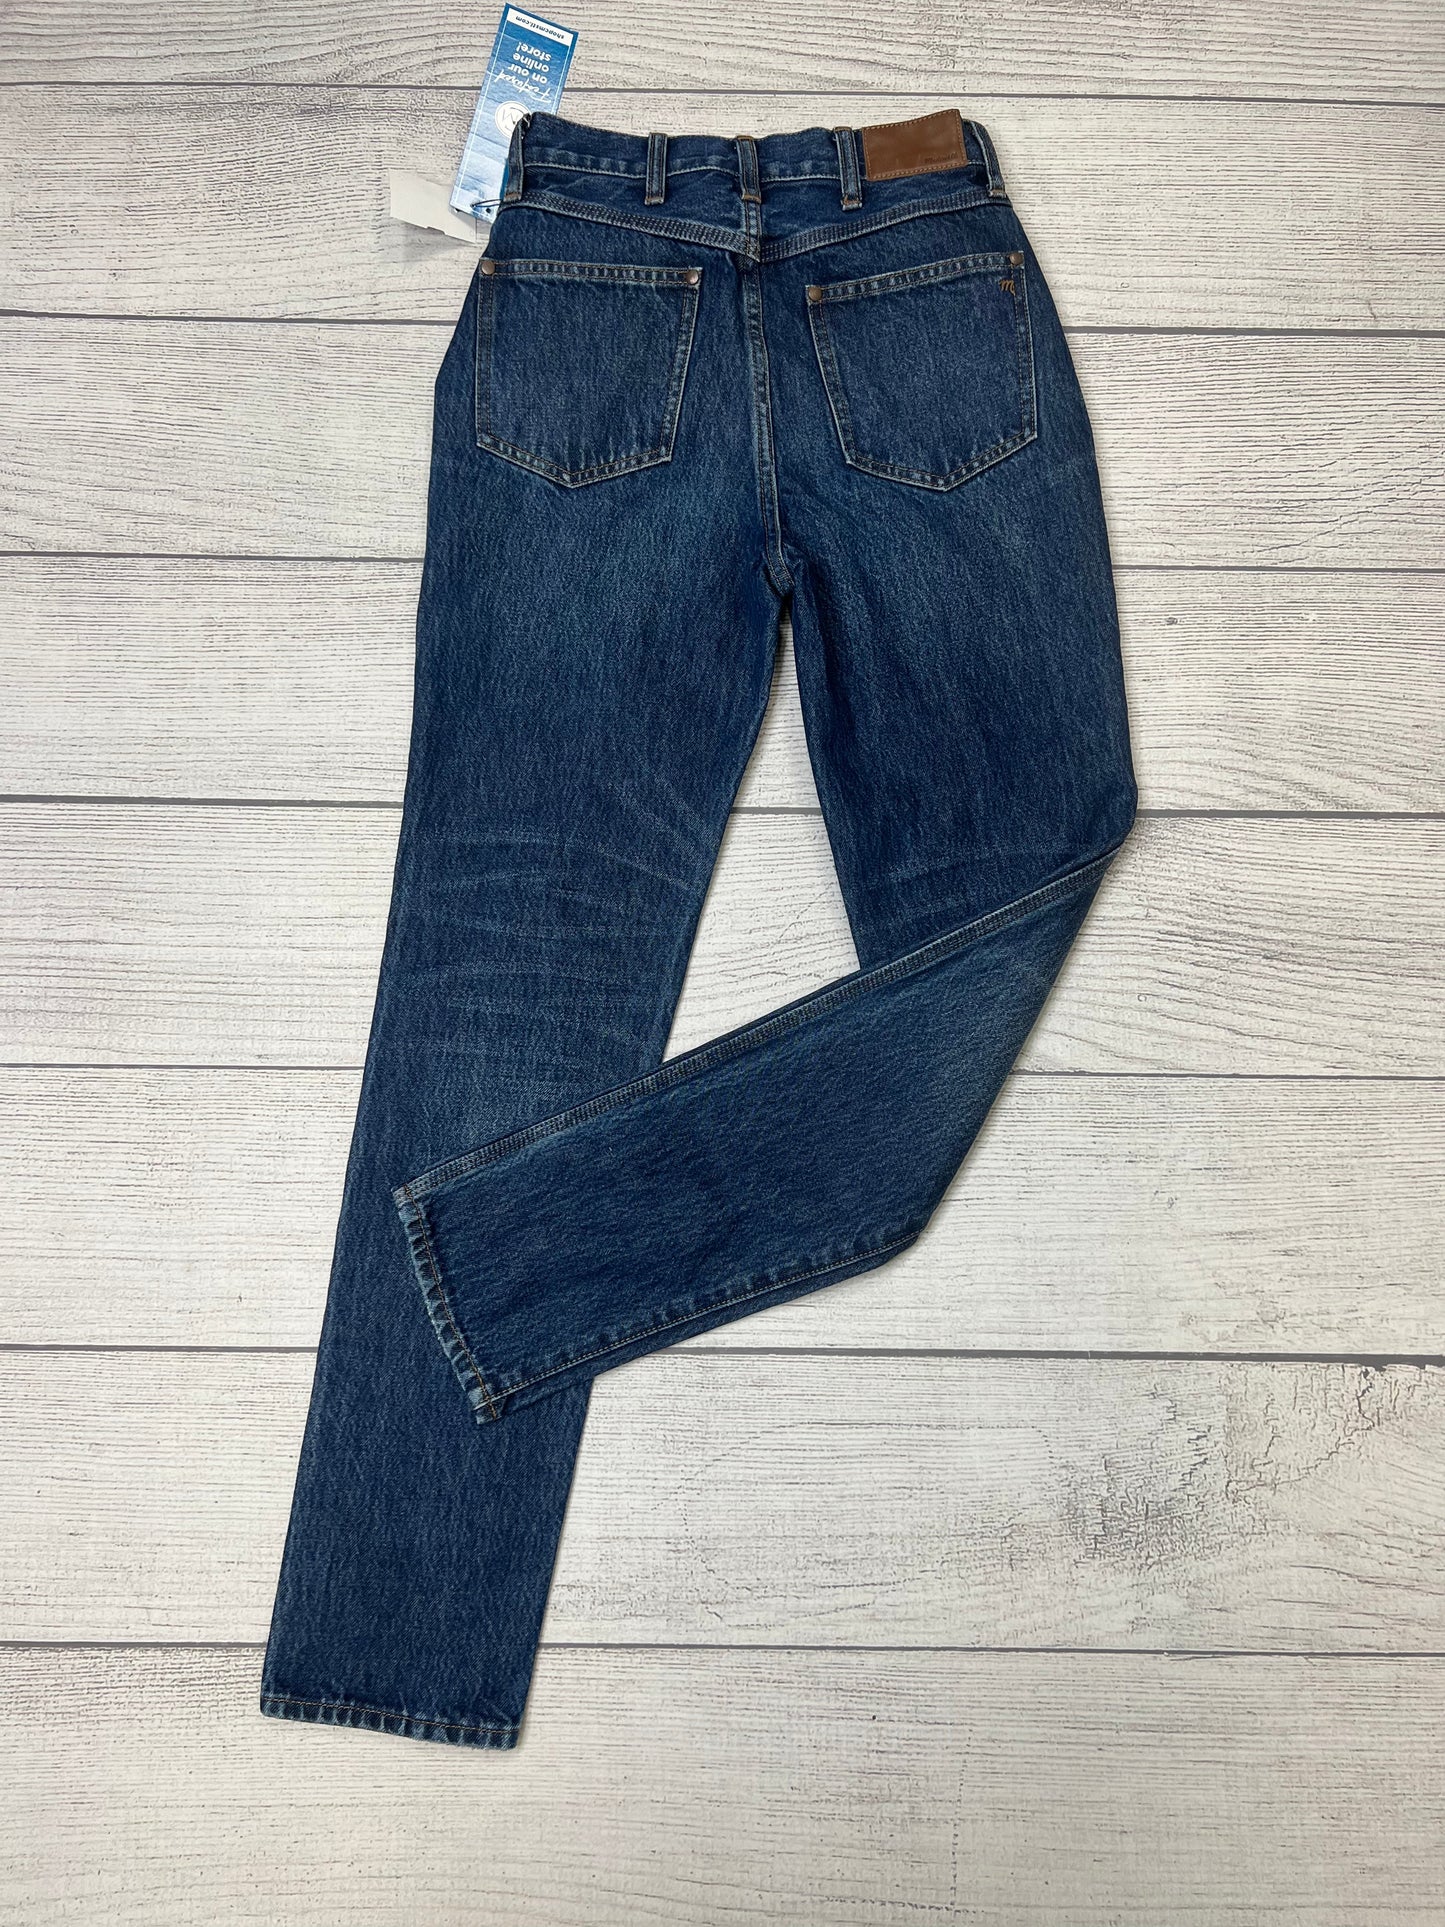 Jeans Relaxed/boyfriend By Madewell  Size: 0